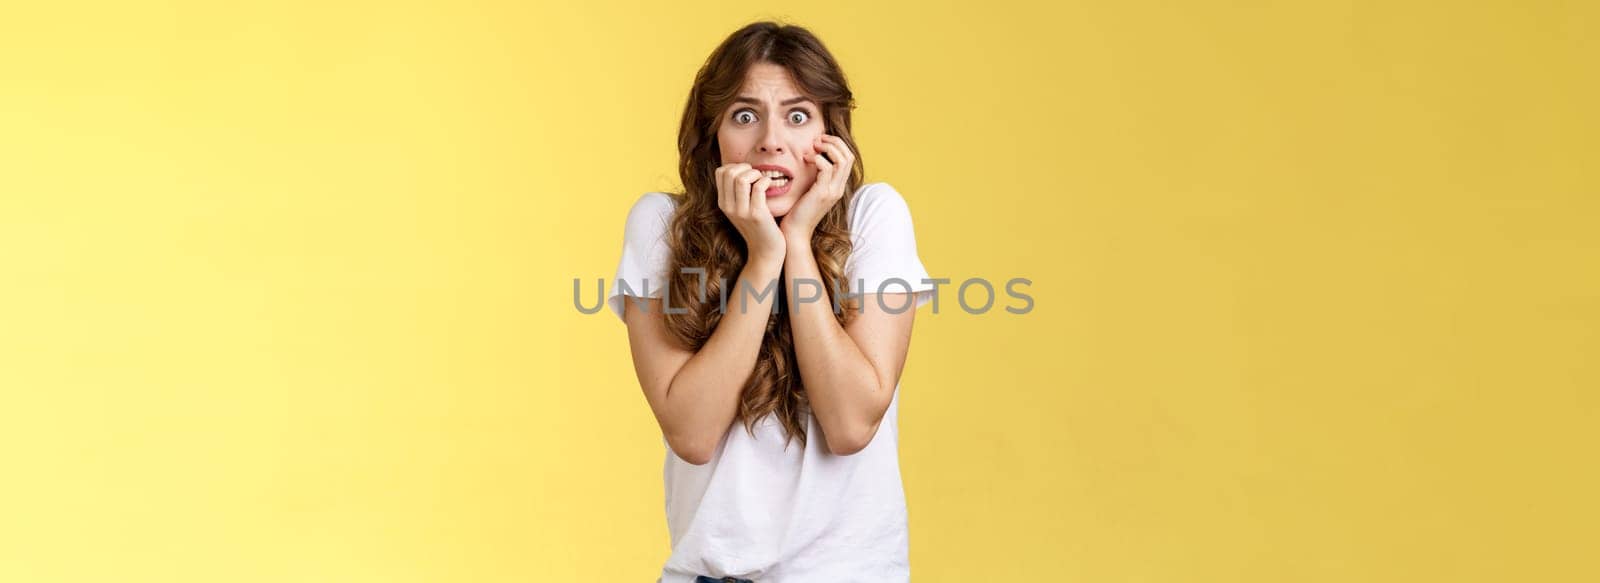 Girl panicking feeling scared timid insecure biting fingernails stare camera frightened clench teeth trembling fear touch face nervously feeling unconfident terrified stand yellow background.